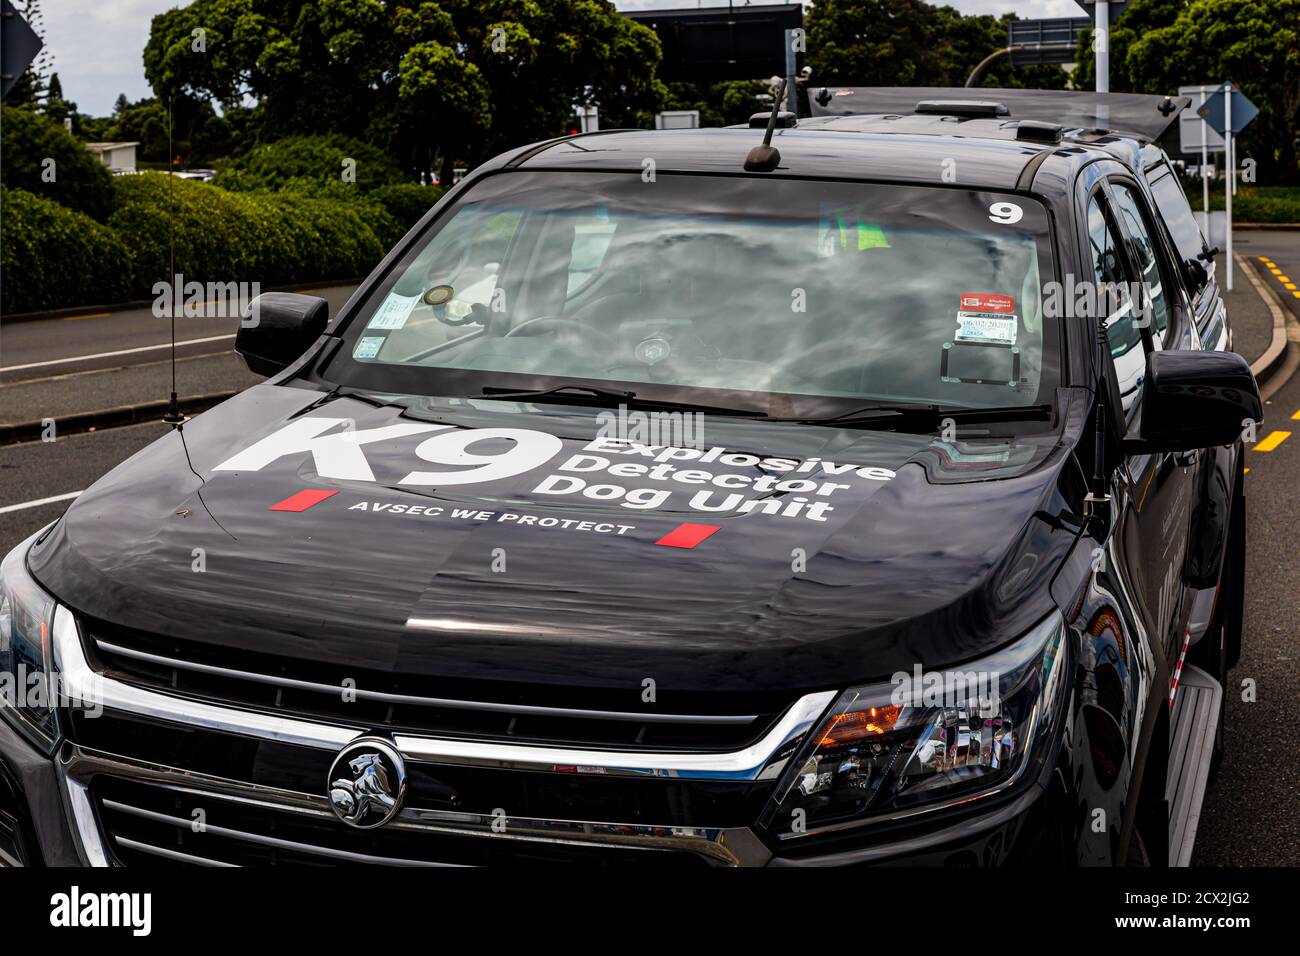 Car of the 'K9 Explosive Detector Dog Unit', a special security brigade for counter terrorism safety at the Auckland International Airport in NZ. Stock Photo